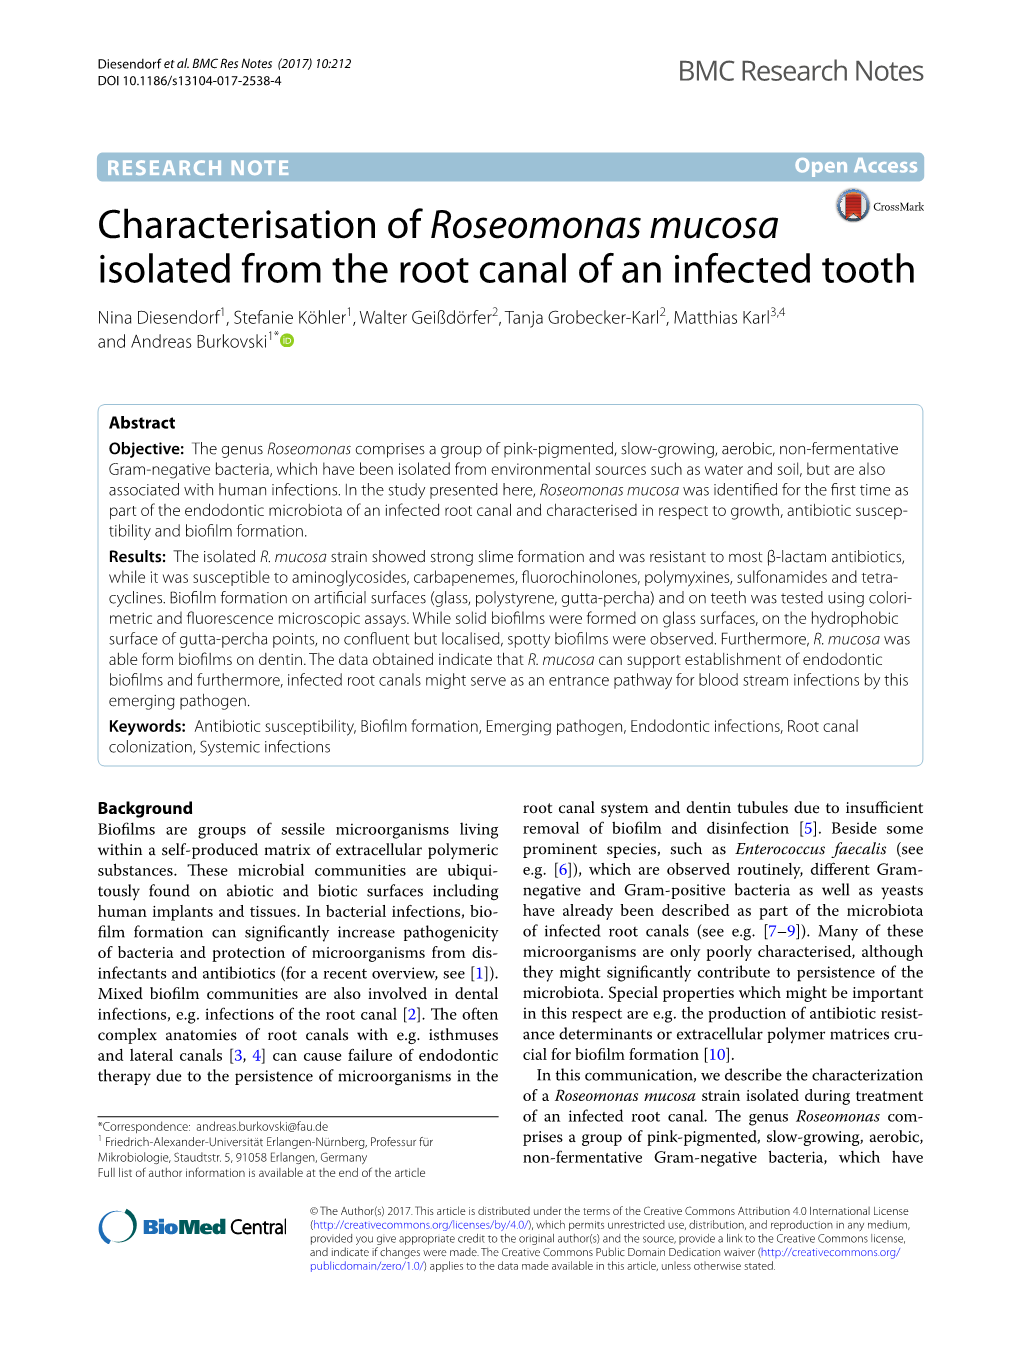 Characterisation of Roseomonas Mucosa Isolated from the Root Canal